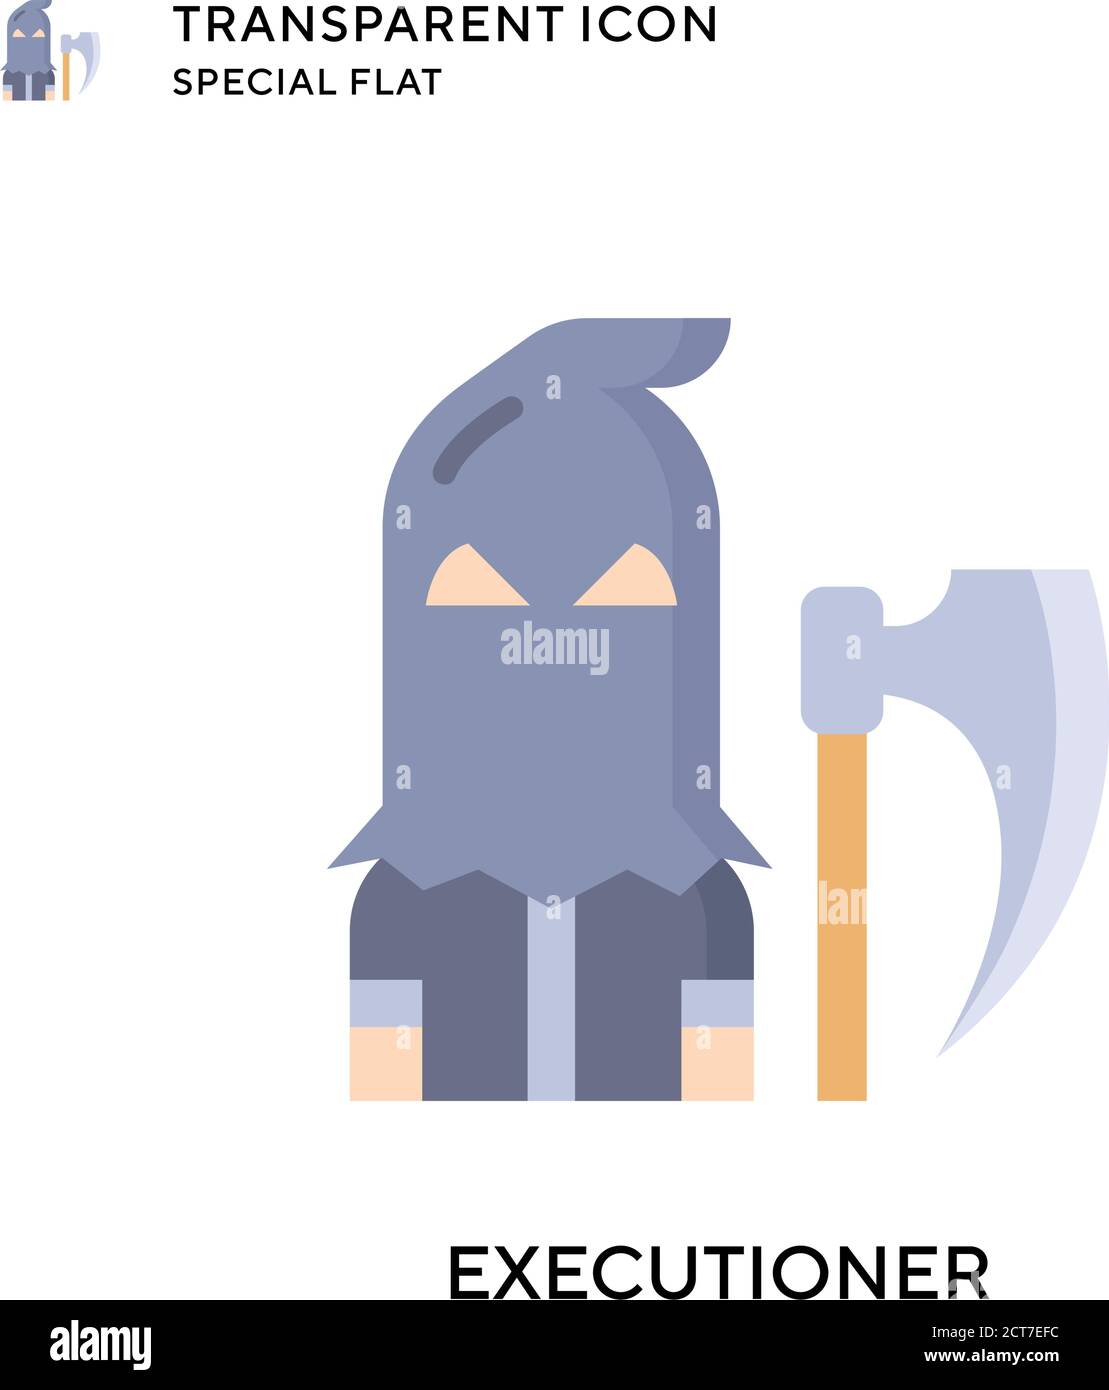 Executioner vector icon. Flat style illustration. EPS 10 vector. Stock Vector